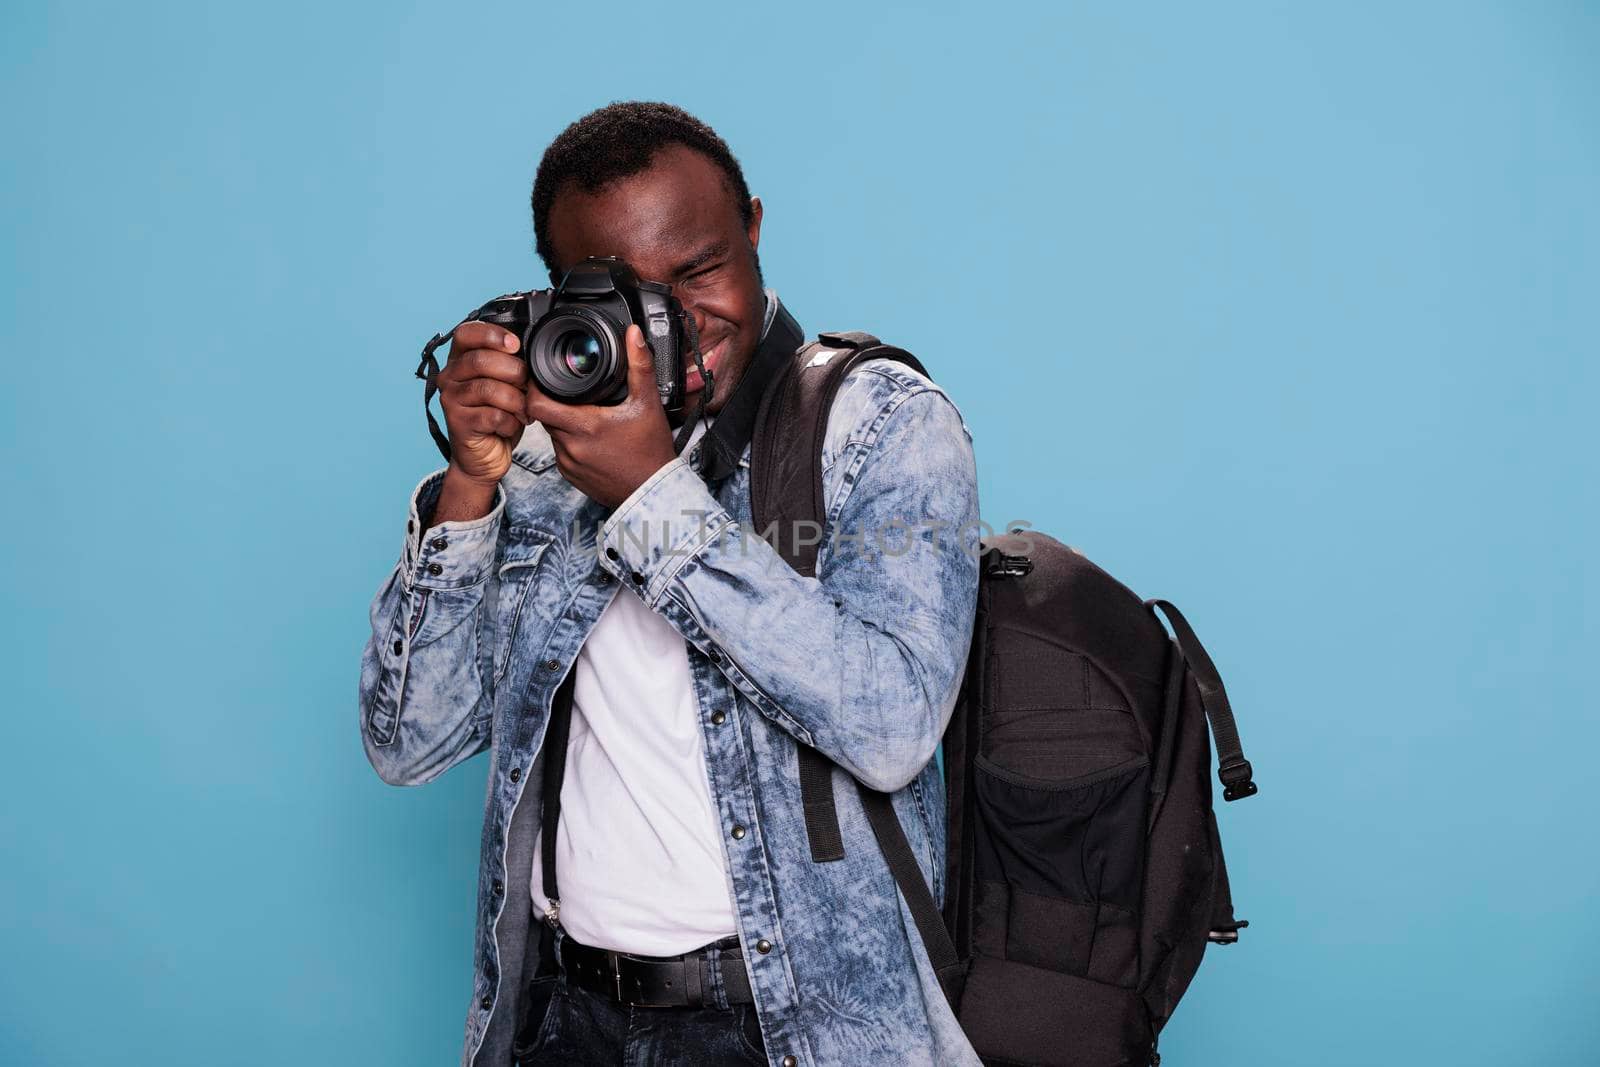 Young professional photographer with DSLR camera taking photo while standing on blue background. Confident photography enthusiast having photo device while taking picture.